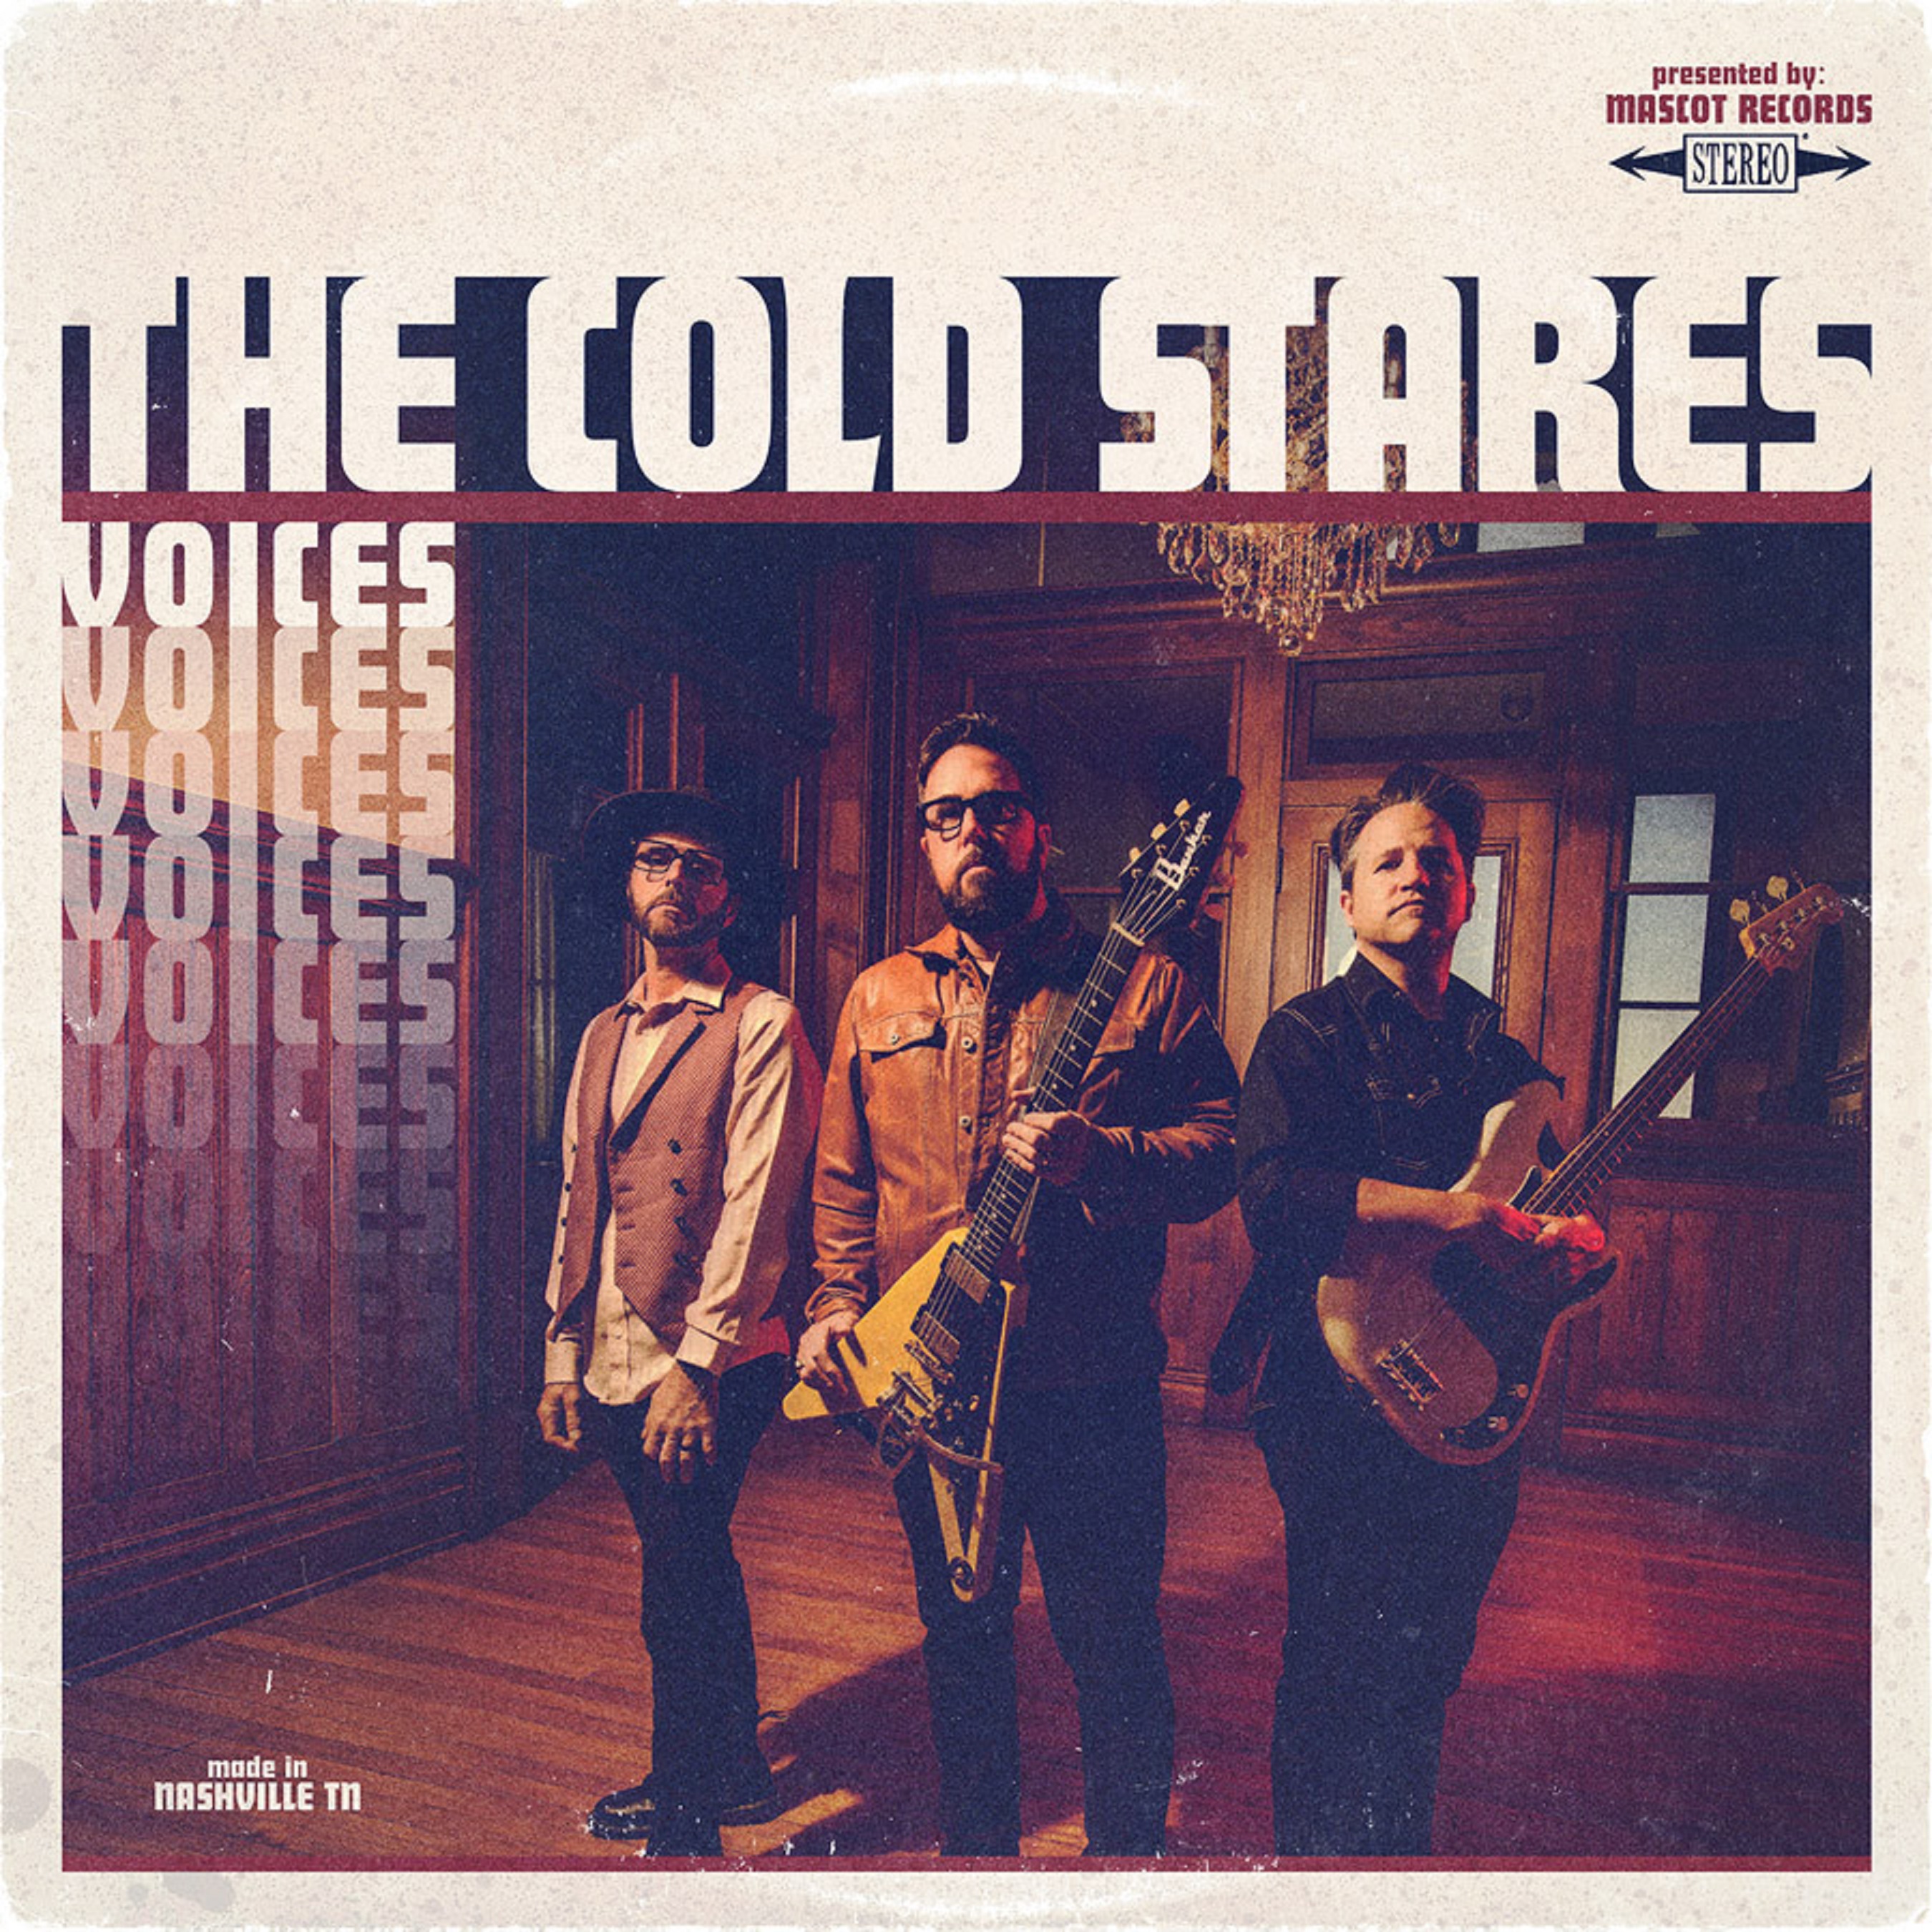 Blues-rock outfit The Cold Stares announce ‘Voices,’ their explosive new album